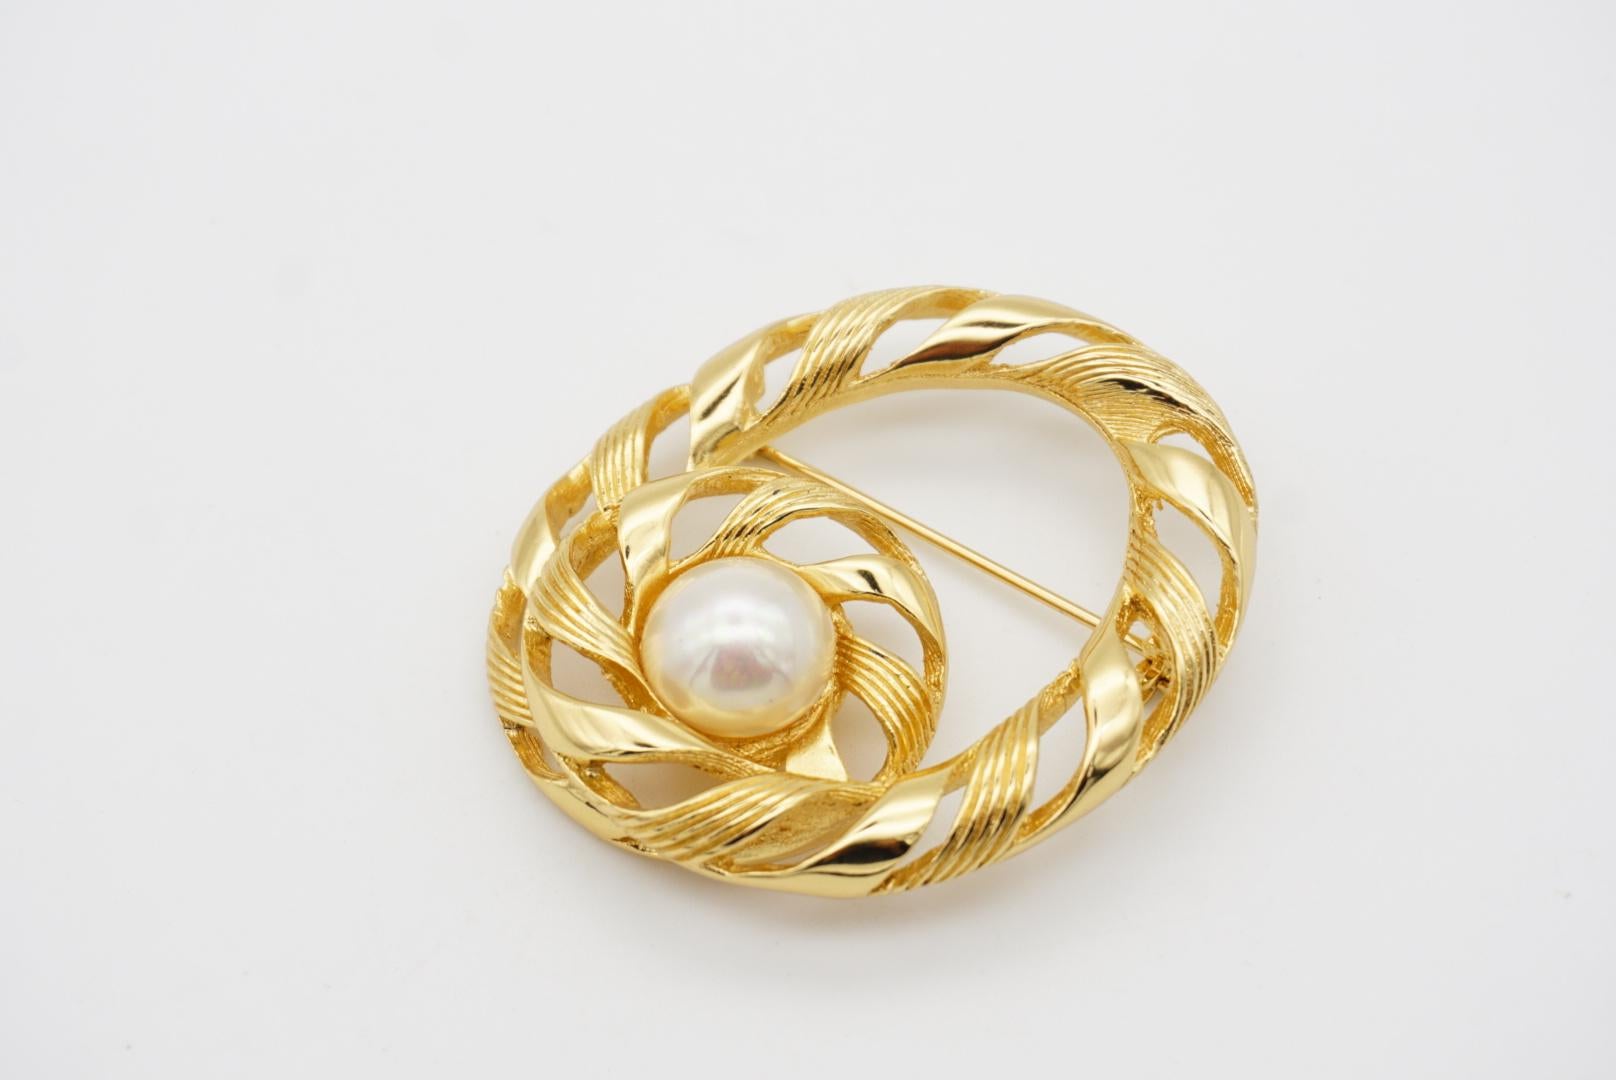 Christian Dior 1970s Vintage Large Oval Swirl Openwork Round Pearl Gold Brooch For Sale 4